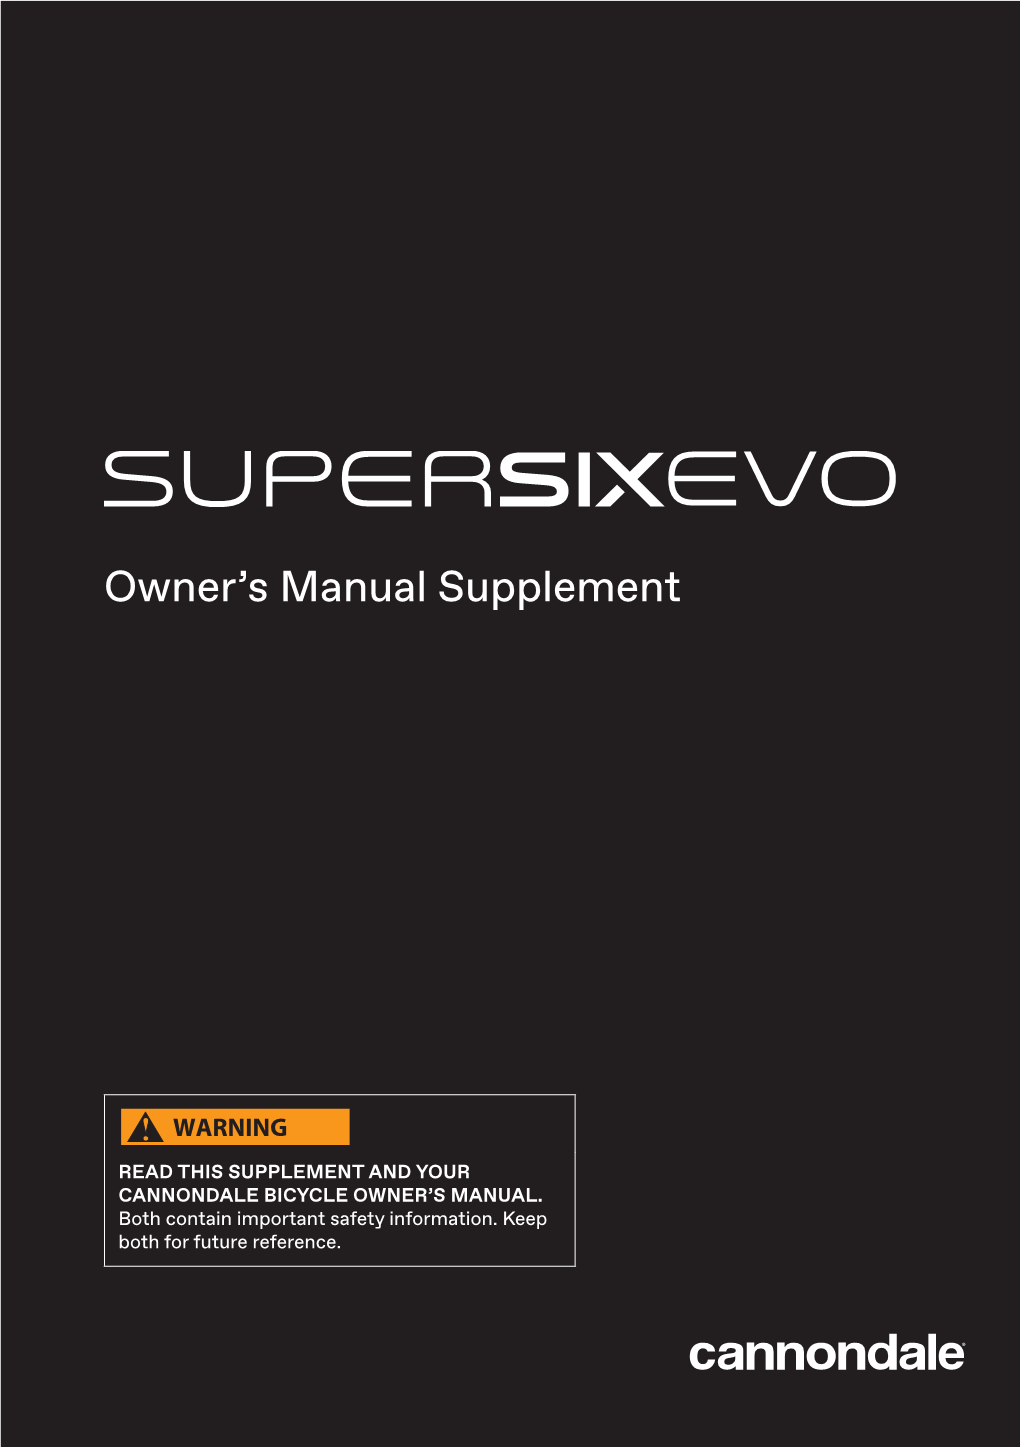 Owner's Manual Supplement